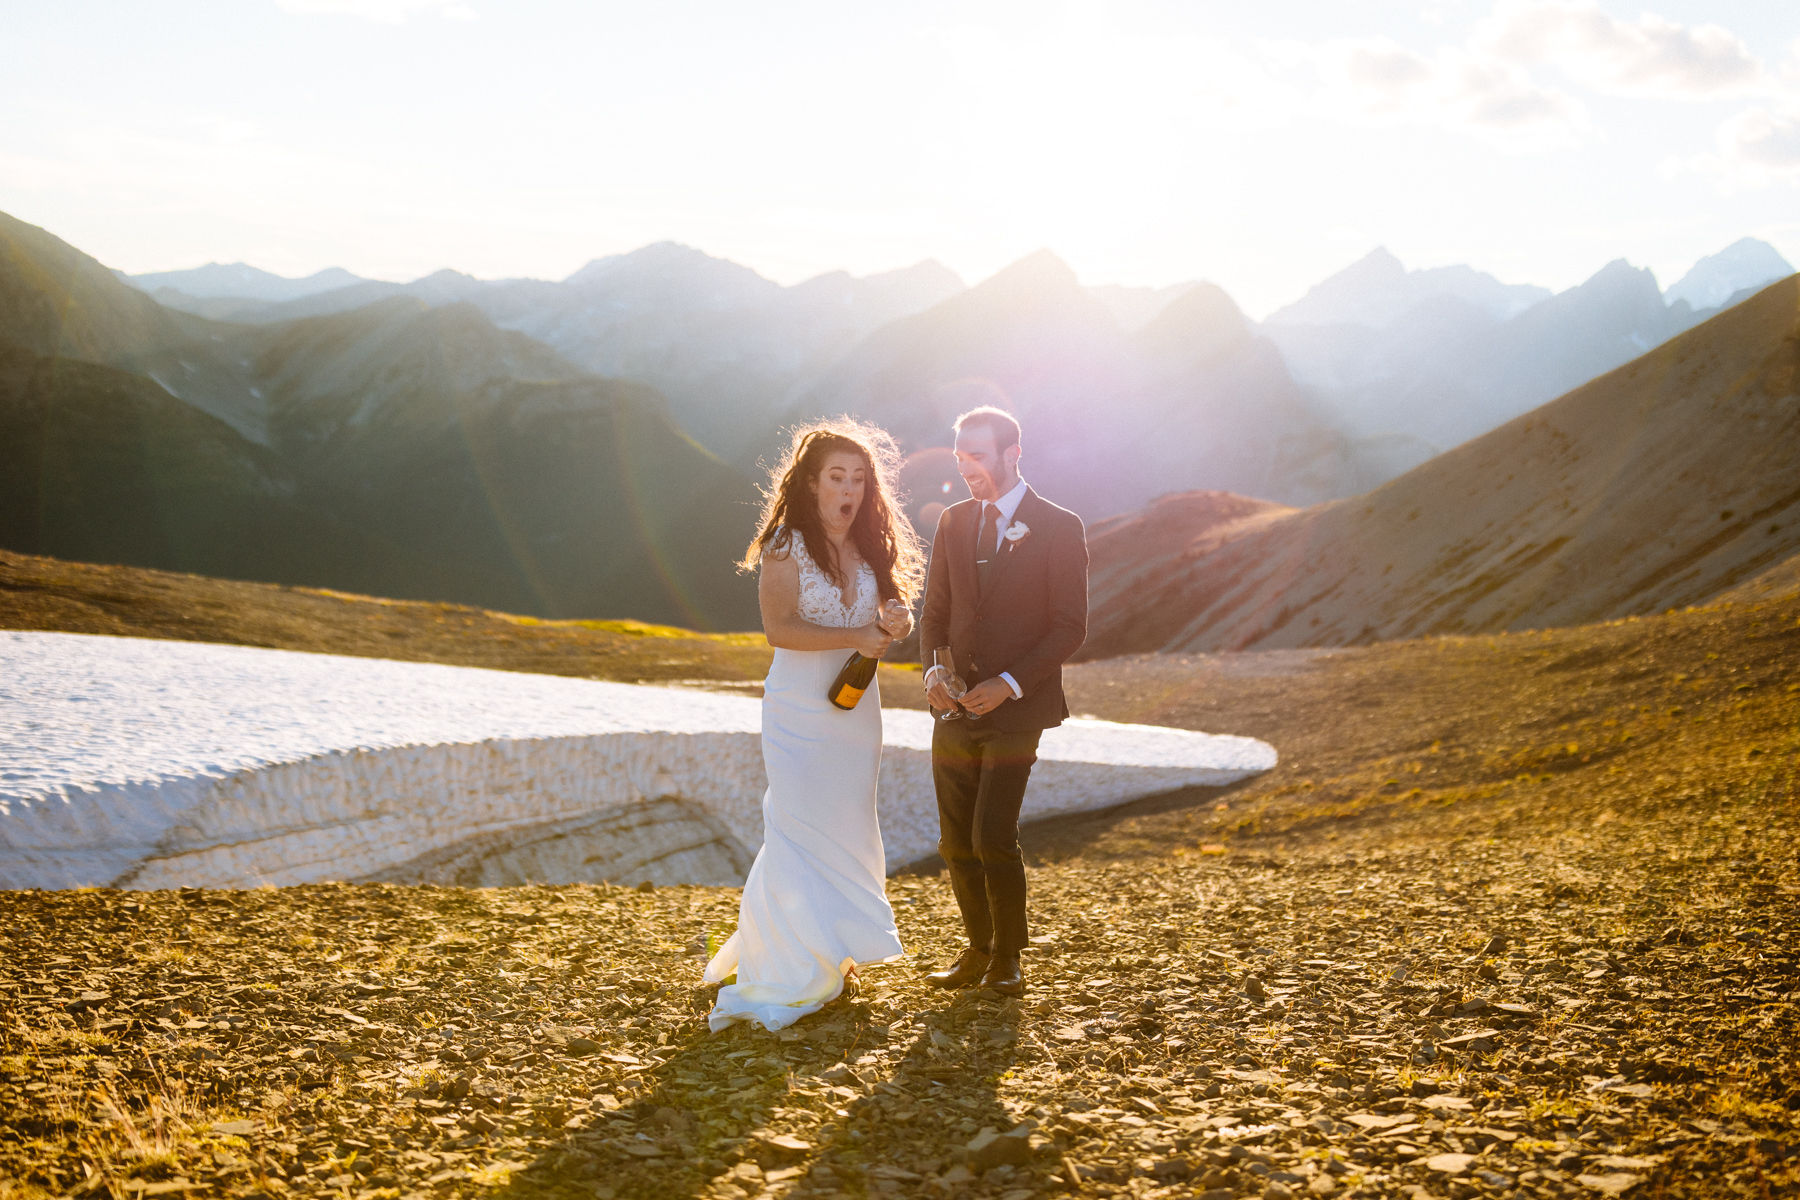 Canmore hiking elopement photographers - Image 42